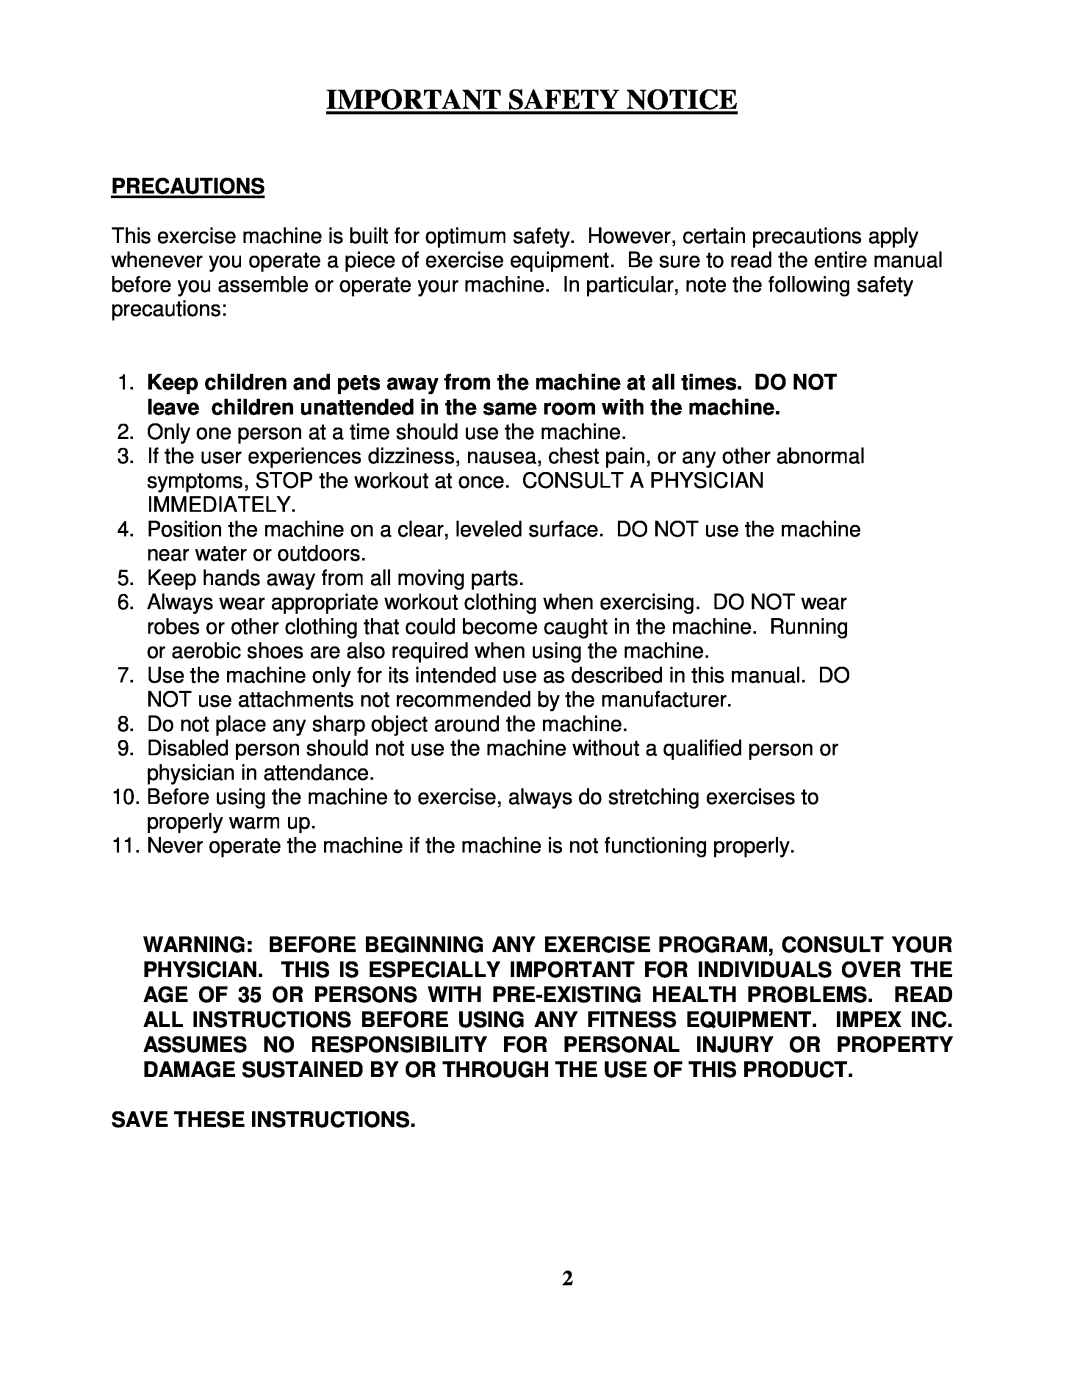 Impex SB 680 manual Important Safety Notice, Precautions, Save These Instructions 